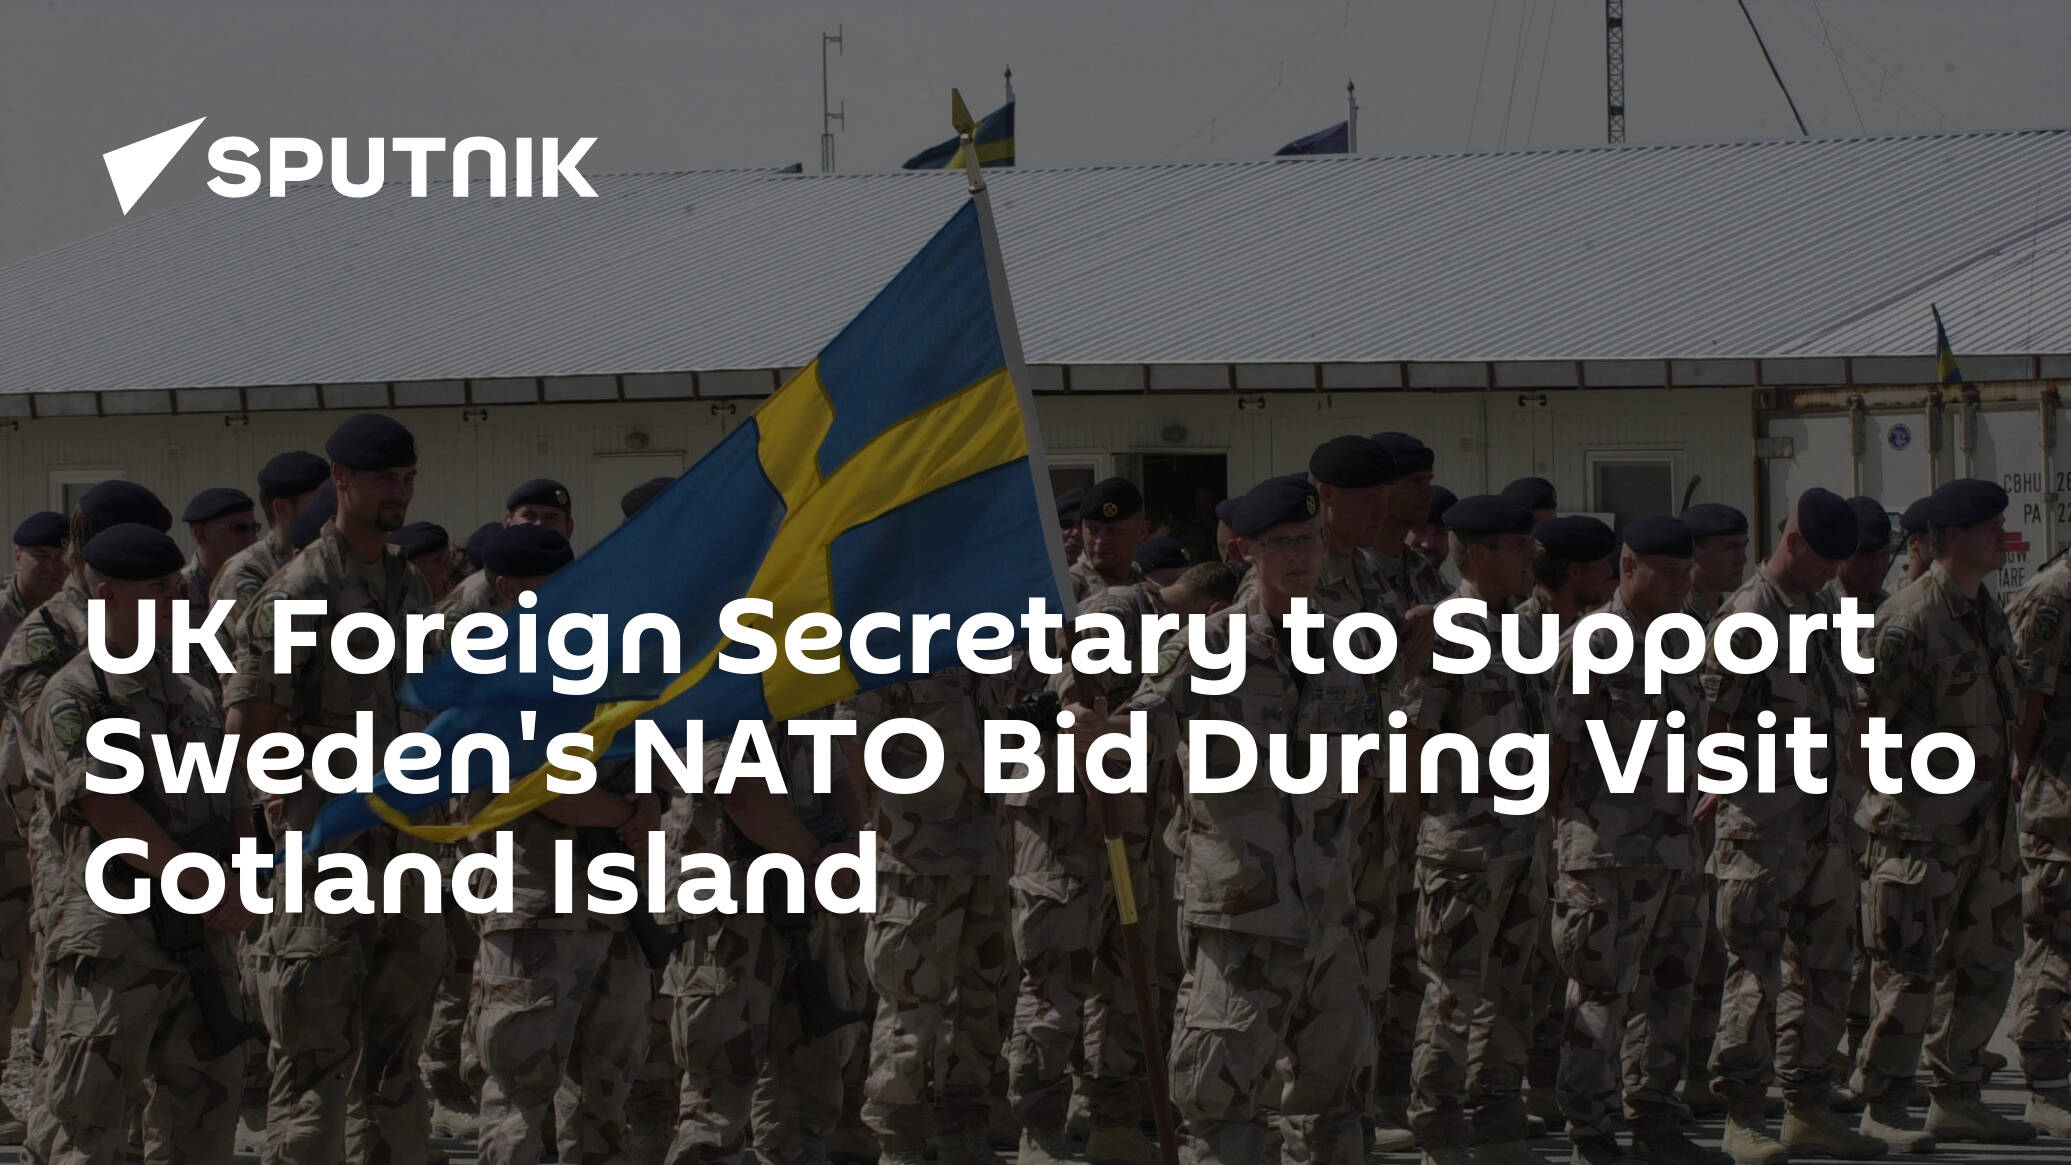 UK Foreign Secretary to Support Sweden's NATO Bid During Visit to Gotland Island